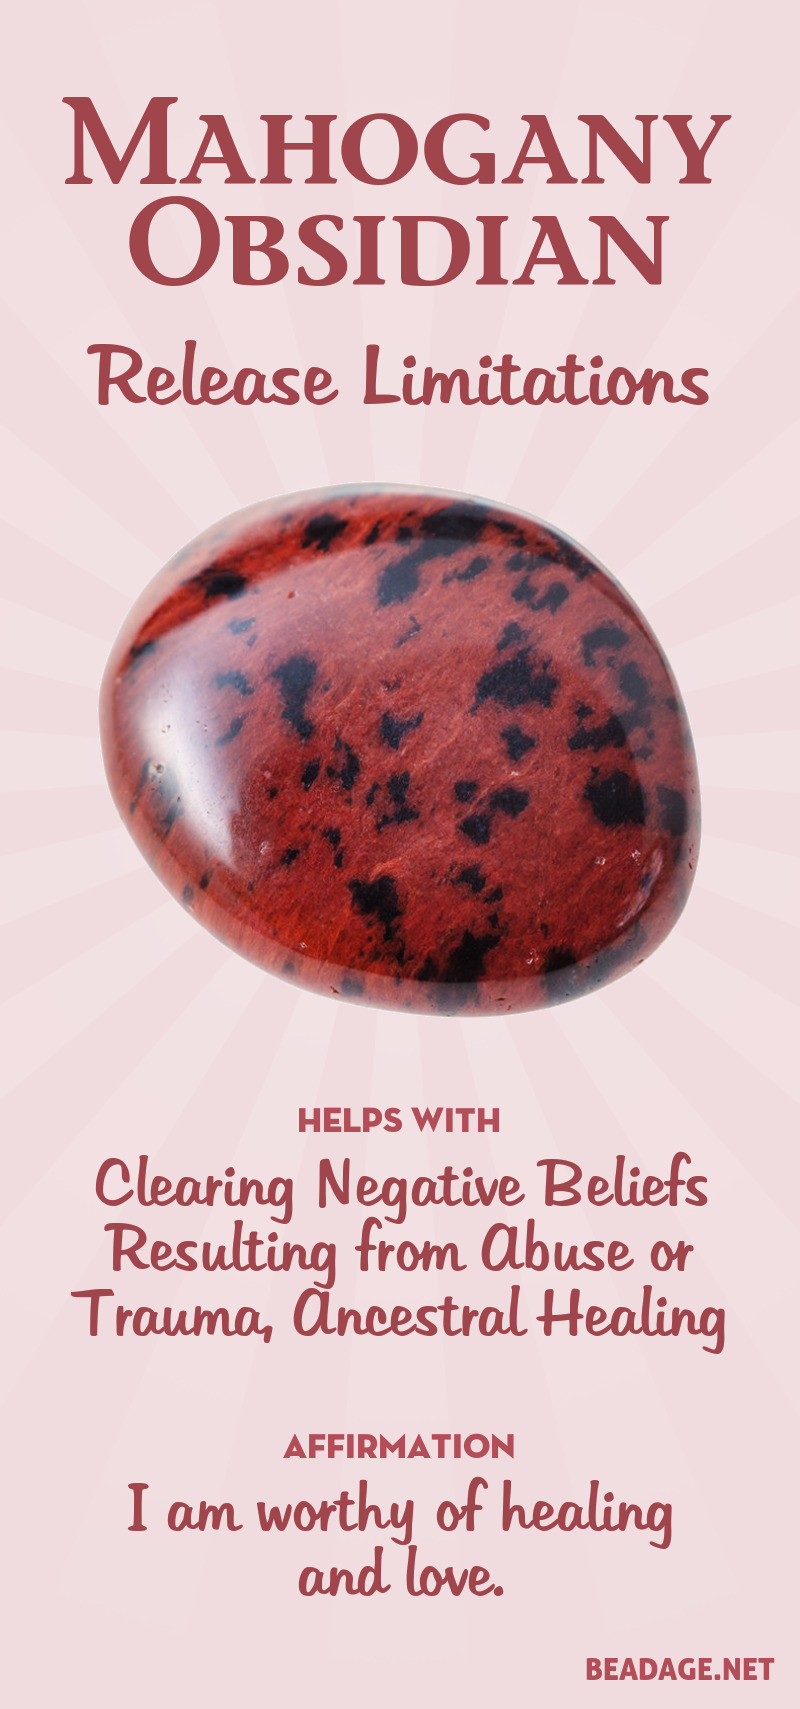 Mahogany Obsidian is useful for clearing self-imposed blocks that lurk in your subconscious due to past harmful experiences. If you feel you are not expressing your full potential due to abuse or trauma in your own life, past lives, or your family lineage, wearing Mahogany Obsidian can help you release these limitations & move forward with renewed purpose. Learn more about Mahogany Obsidian meaning + healing properties, benefits & more.